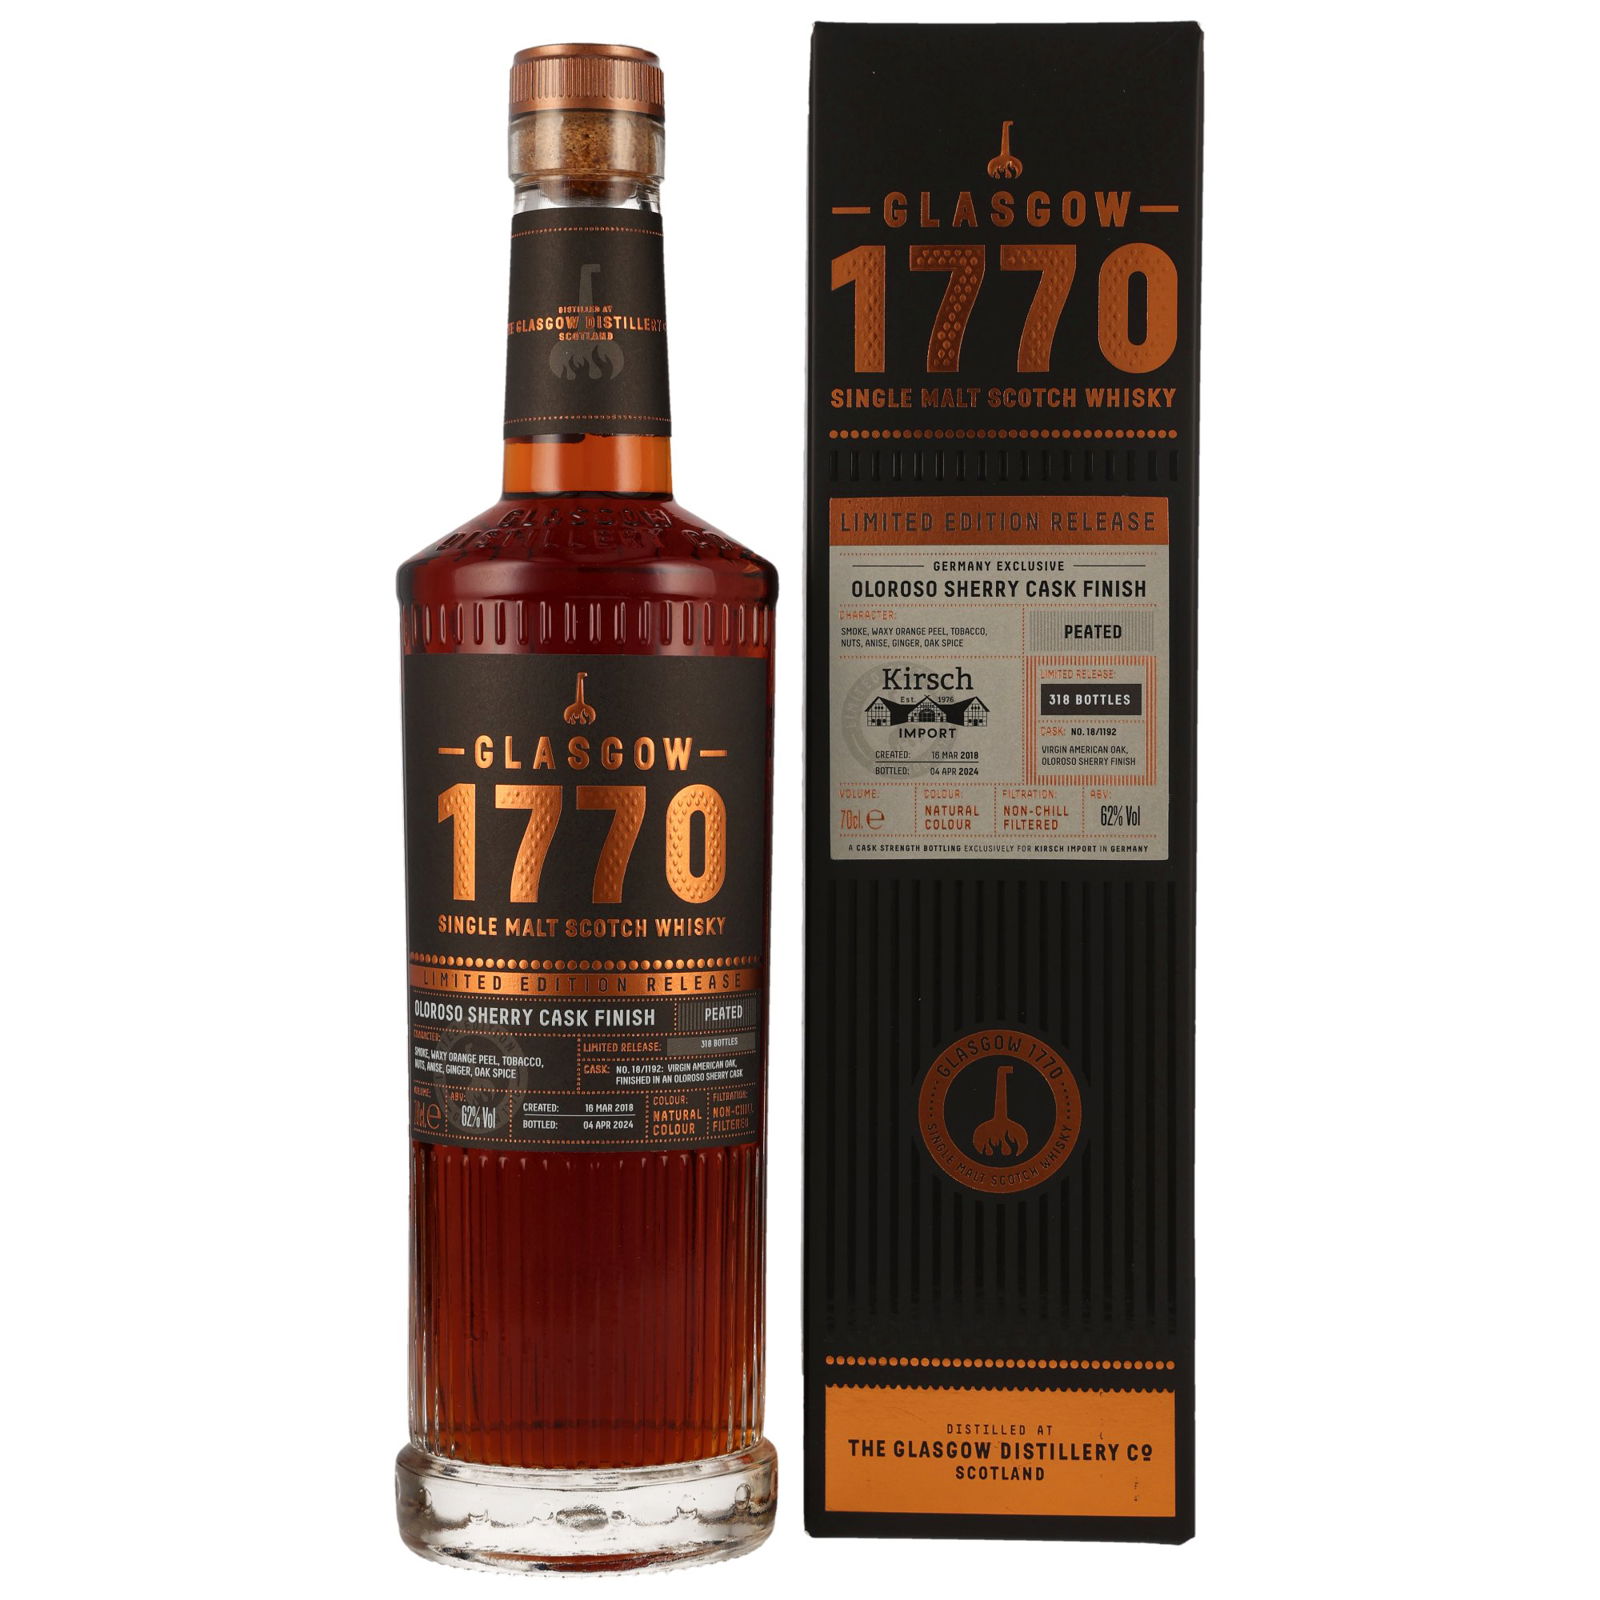 Glasgow 1770 2018/2024 Peated Oloroso Sherry Cask Finish No. 18/1192 Limited Edition Release